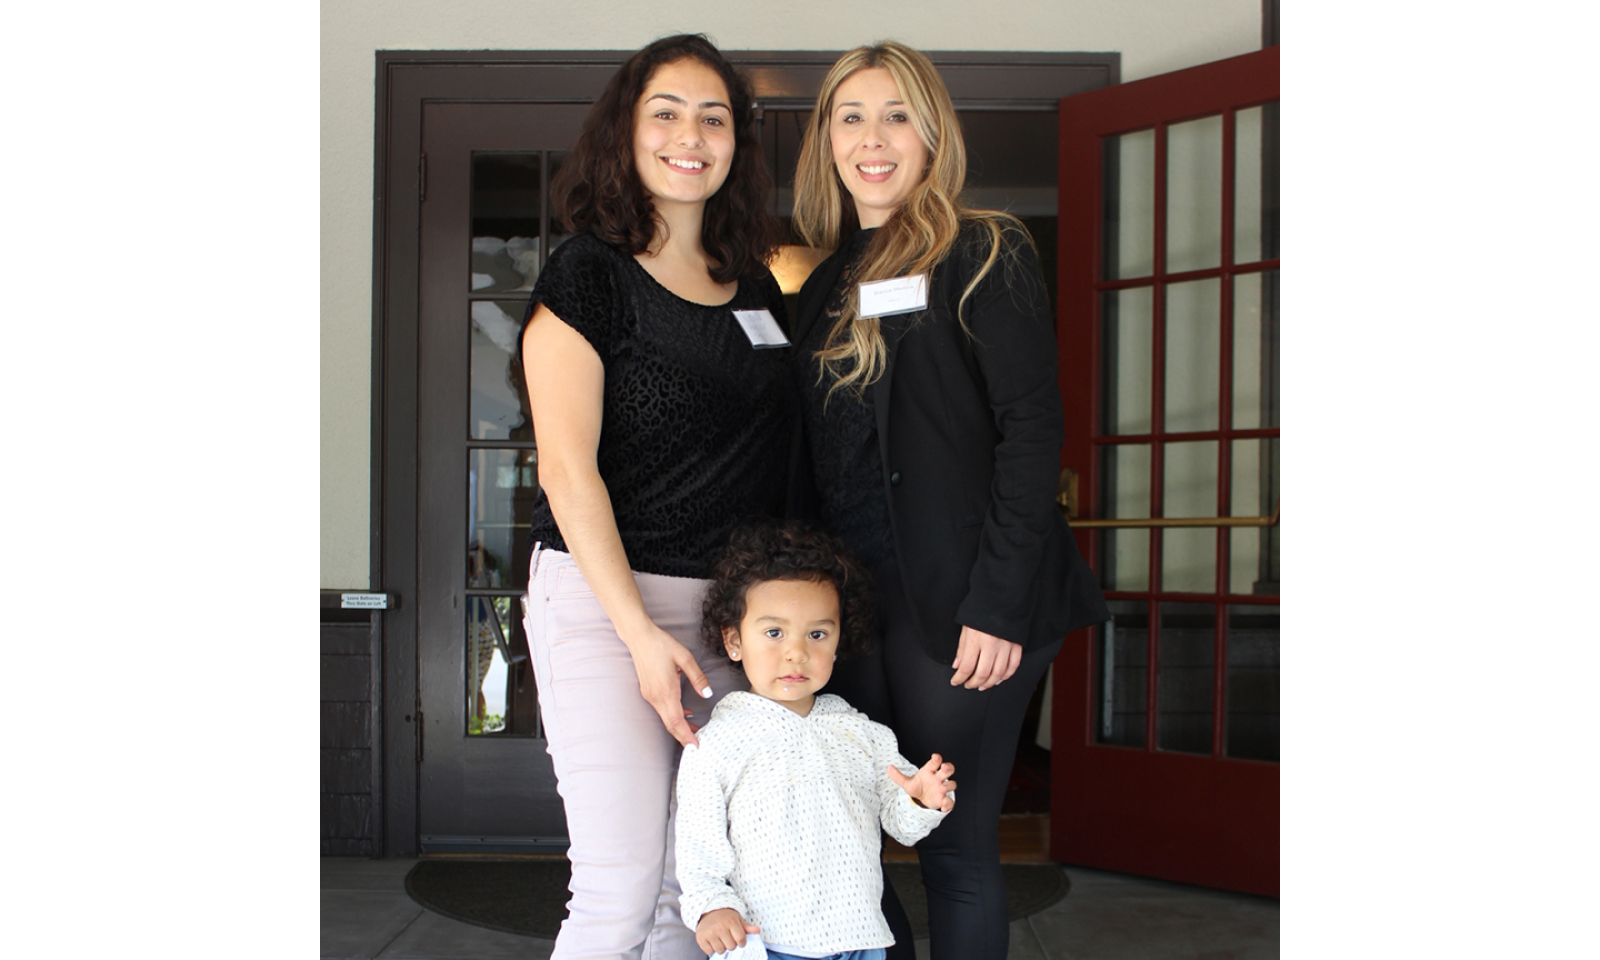 LiveAble graduate Nicole celebrates with her Able Works coach, Blanca Medina, and son, in East Palo Alto. The LiveAble program helps women achieve financial stability, 